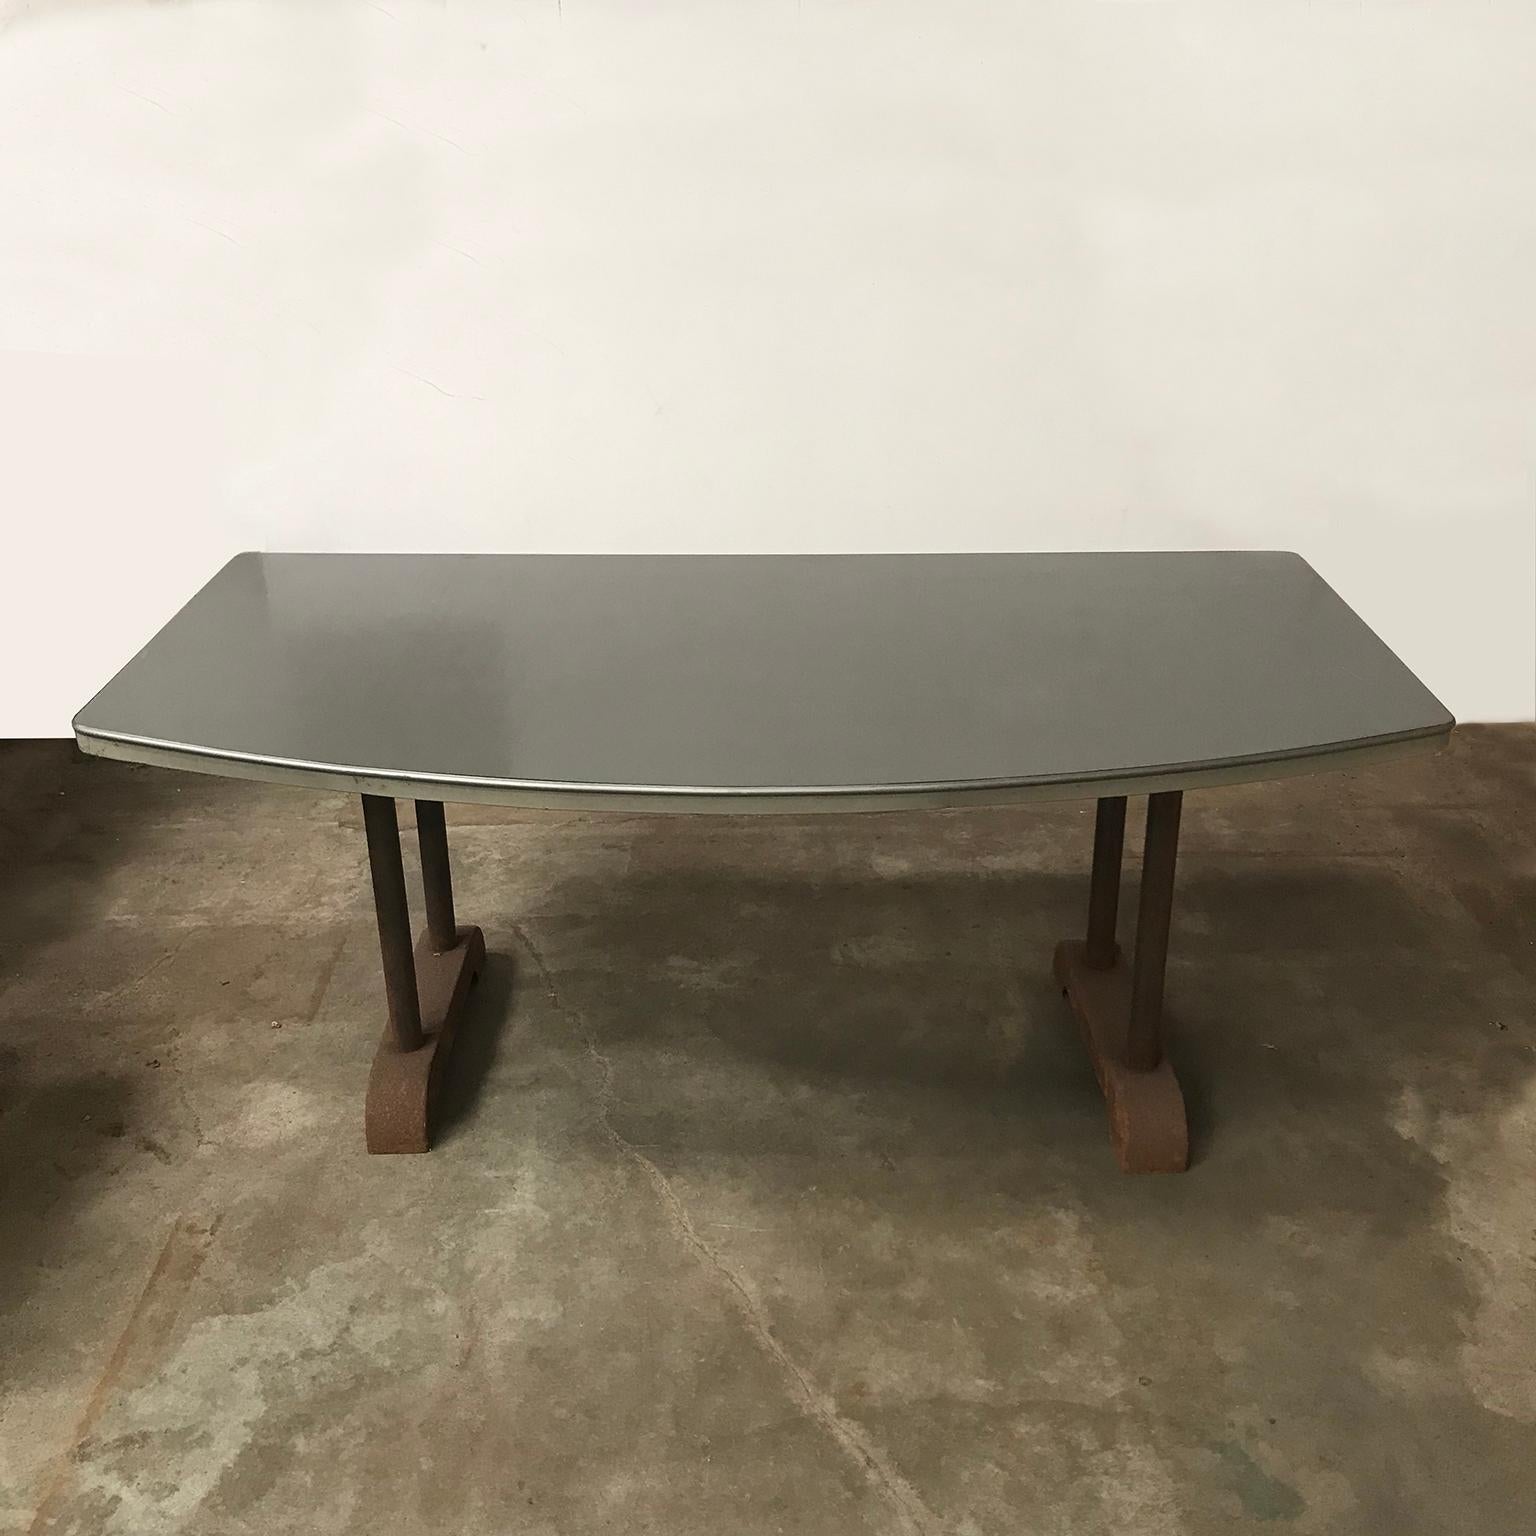 Dutch Industrial Reception Table with Round Curve in Top / Only Top Six Hundred Euro